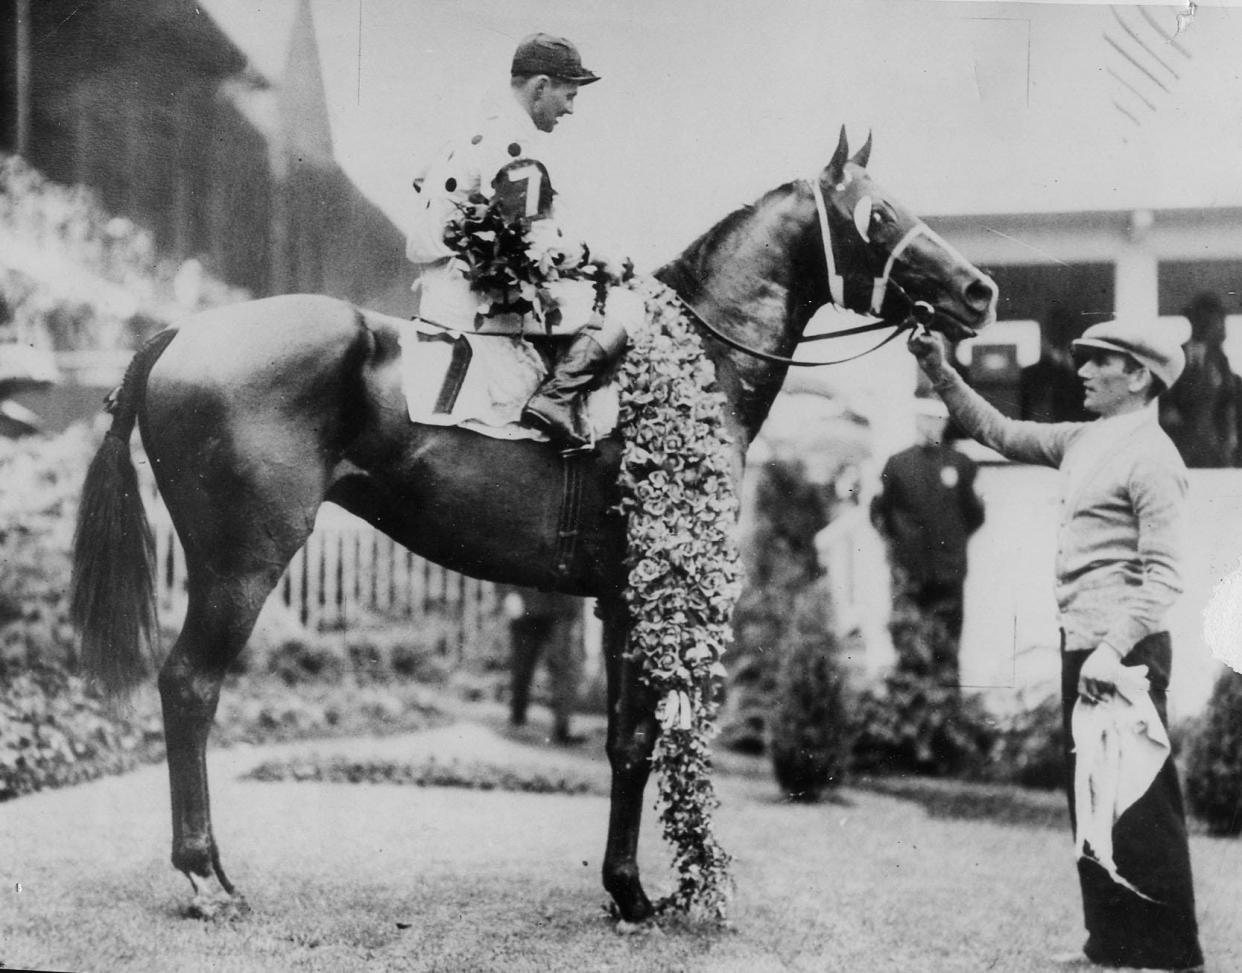 In 1930, Gallant Fox became the second Triple Crown winner. Earl Sande, who rode Gallant Fox in the Derby, was the jockey on Billy Kelly, who finished second to Sir Barton, the first Triple Crown winner, in the 1919 Derby.